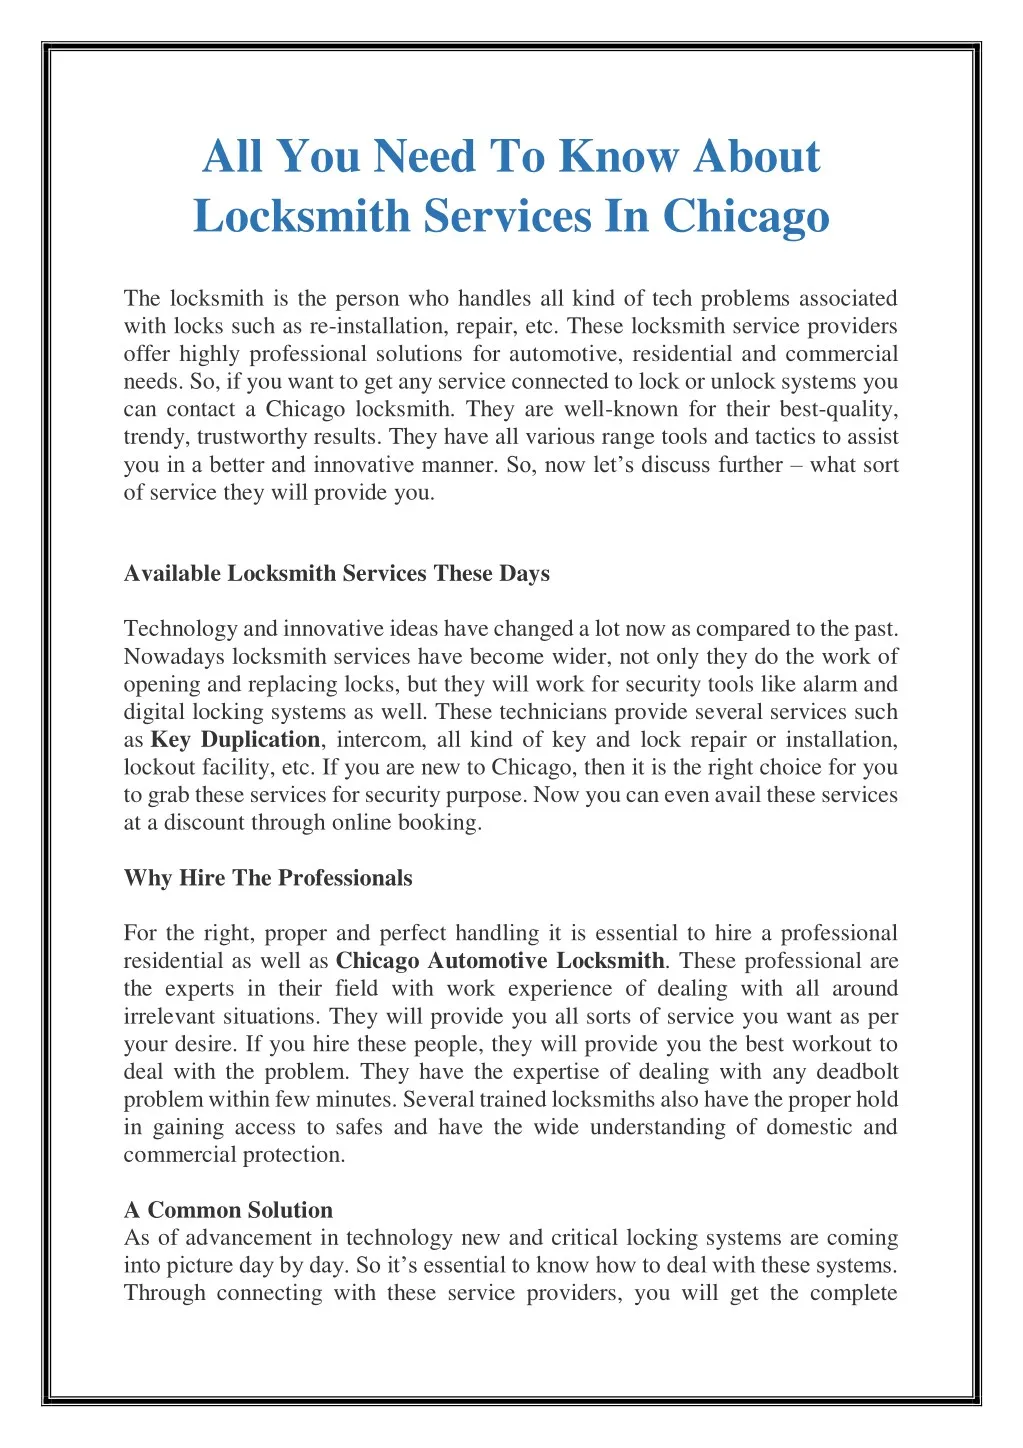 all you need to know about locksmith services